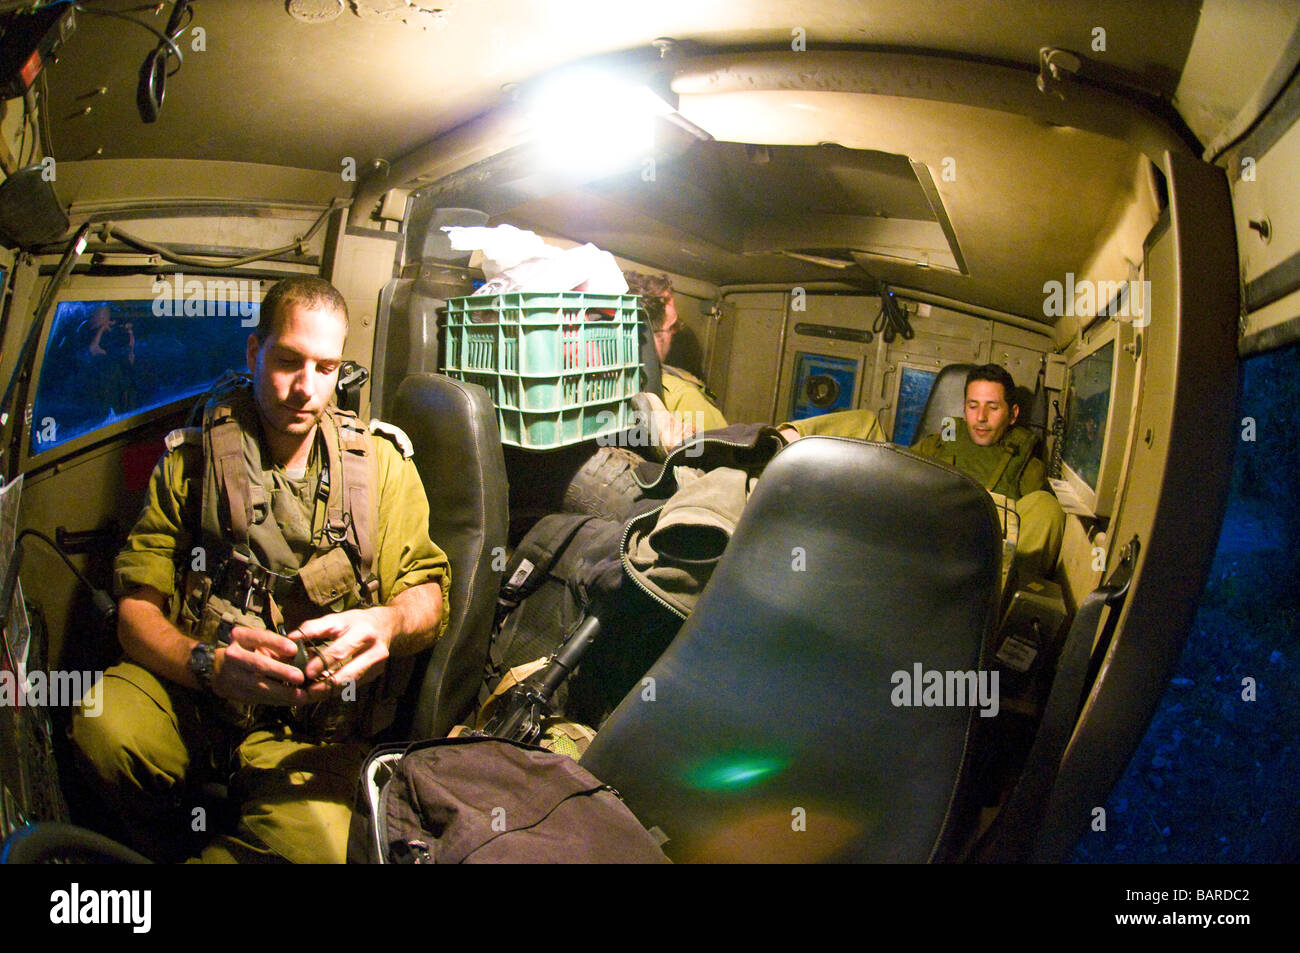 Israel West Bank Israeli reserve soldiers on patrol during active duty Interior of the armoured jeep Stock Photo